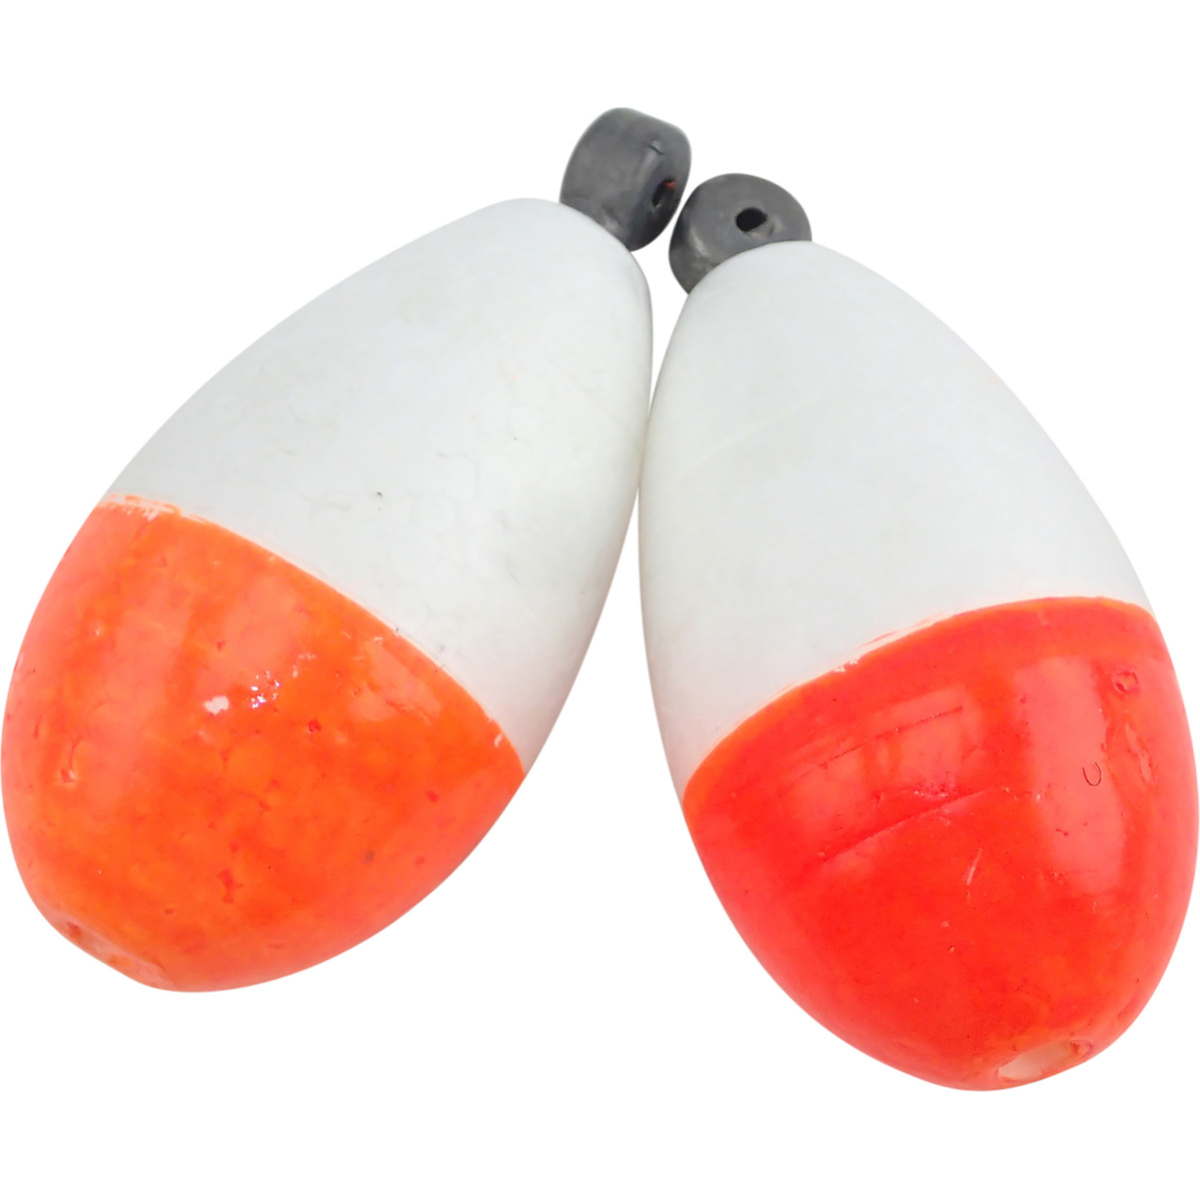 Photo of Kittrick Amish Weighted Slip Floats for sale at United Tackle Shops.